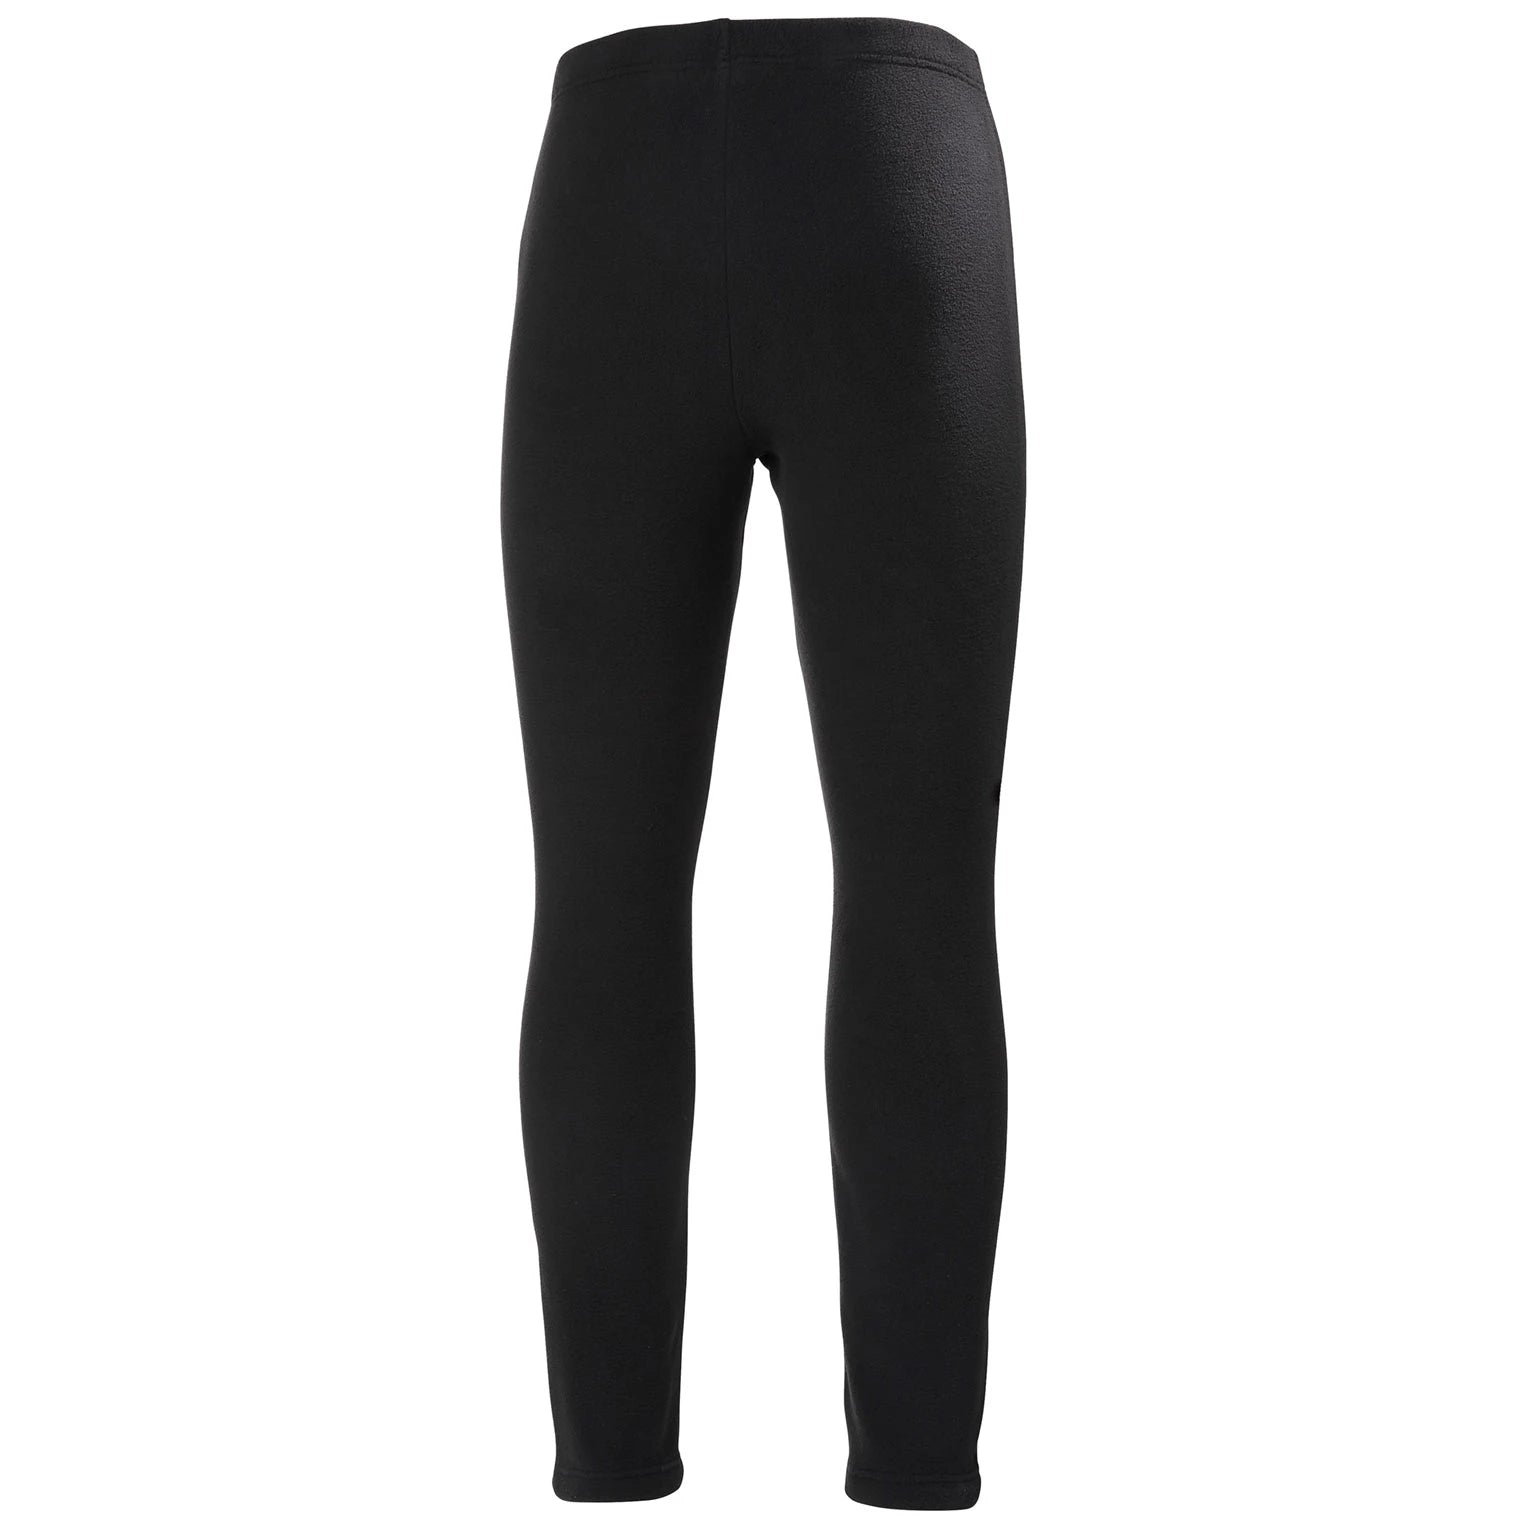 Girls Tights & Leggings - Premium Pants for Girls at Mountain Kids  Outfitters